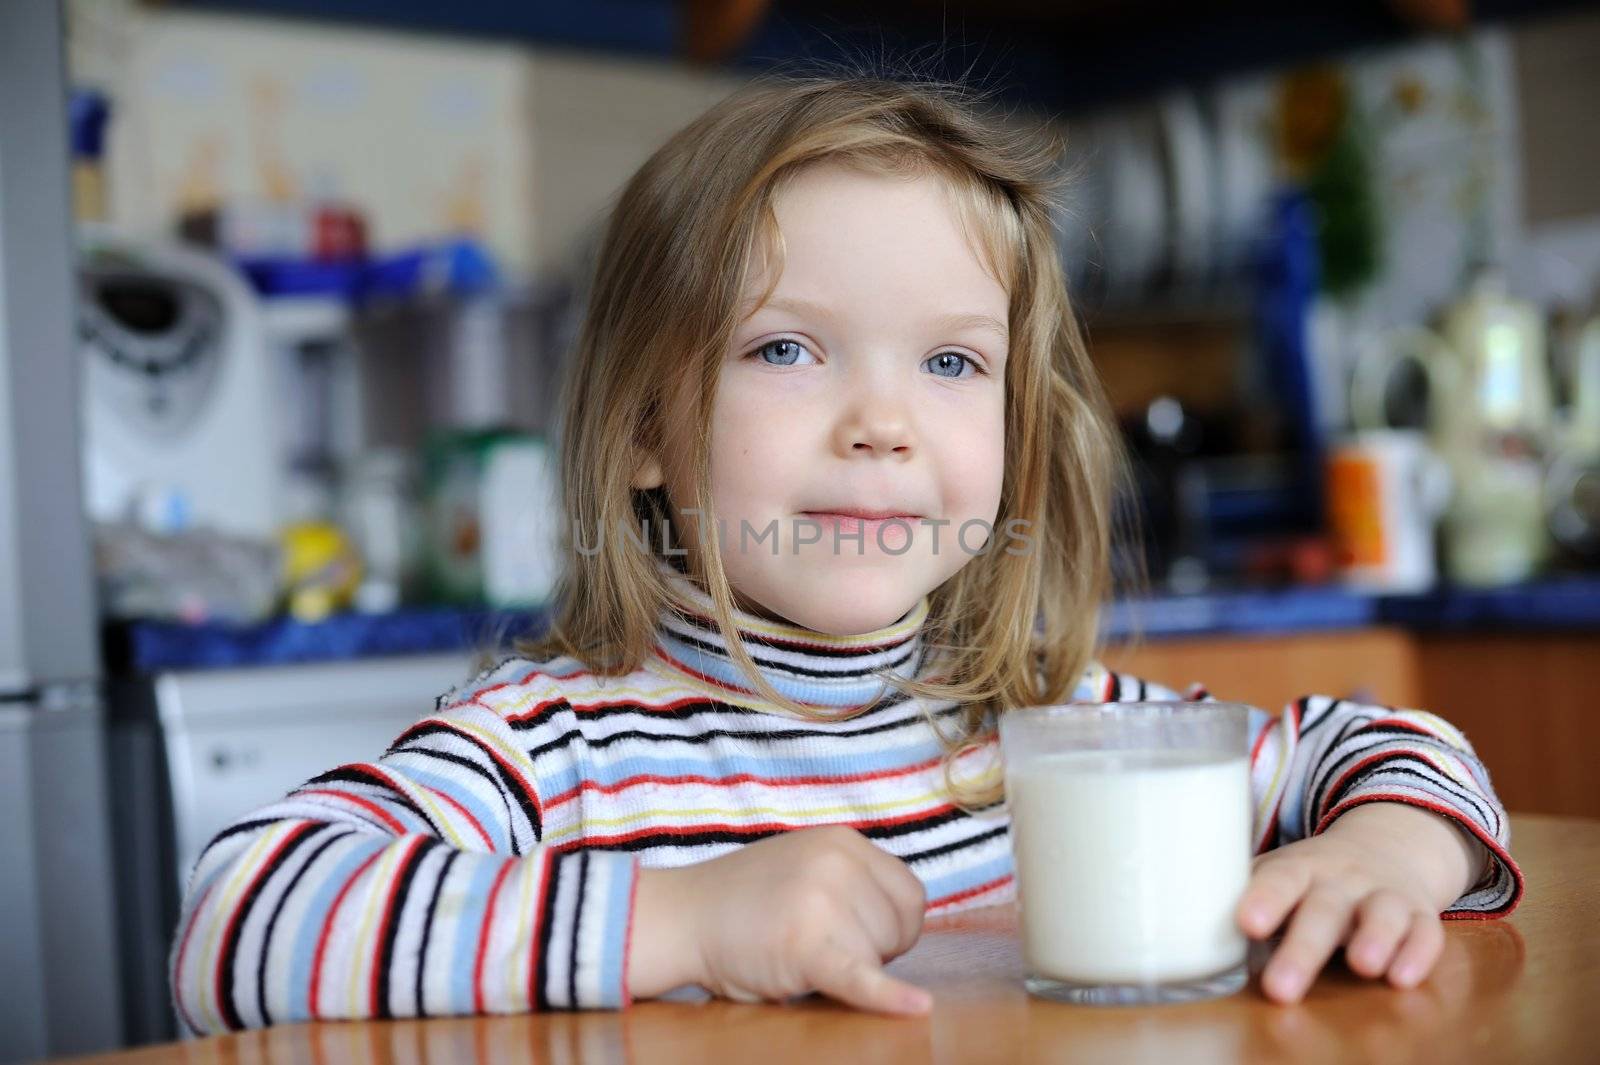 An image of a girl with a glass of milk